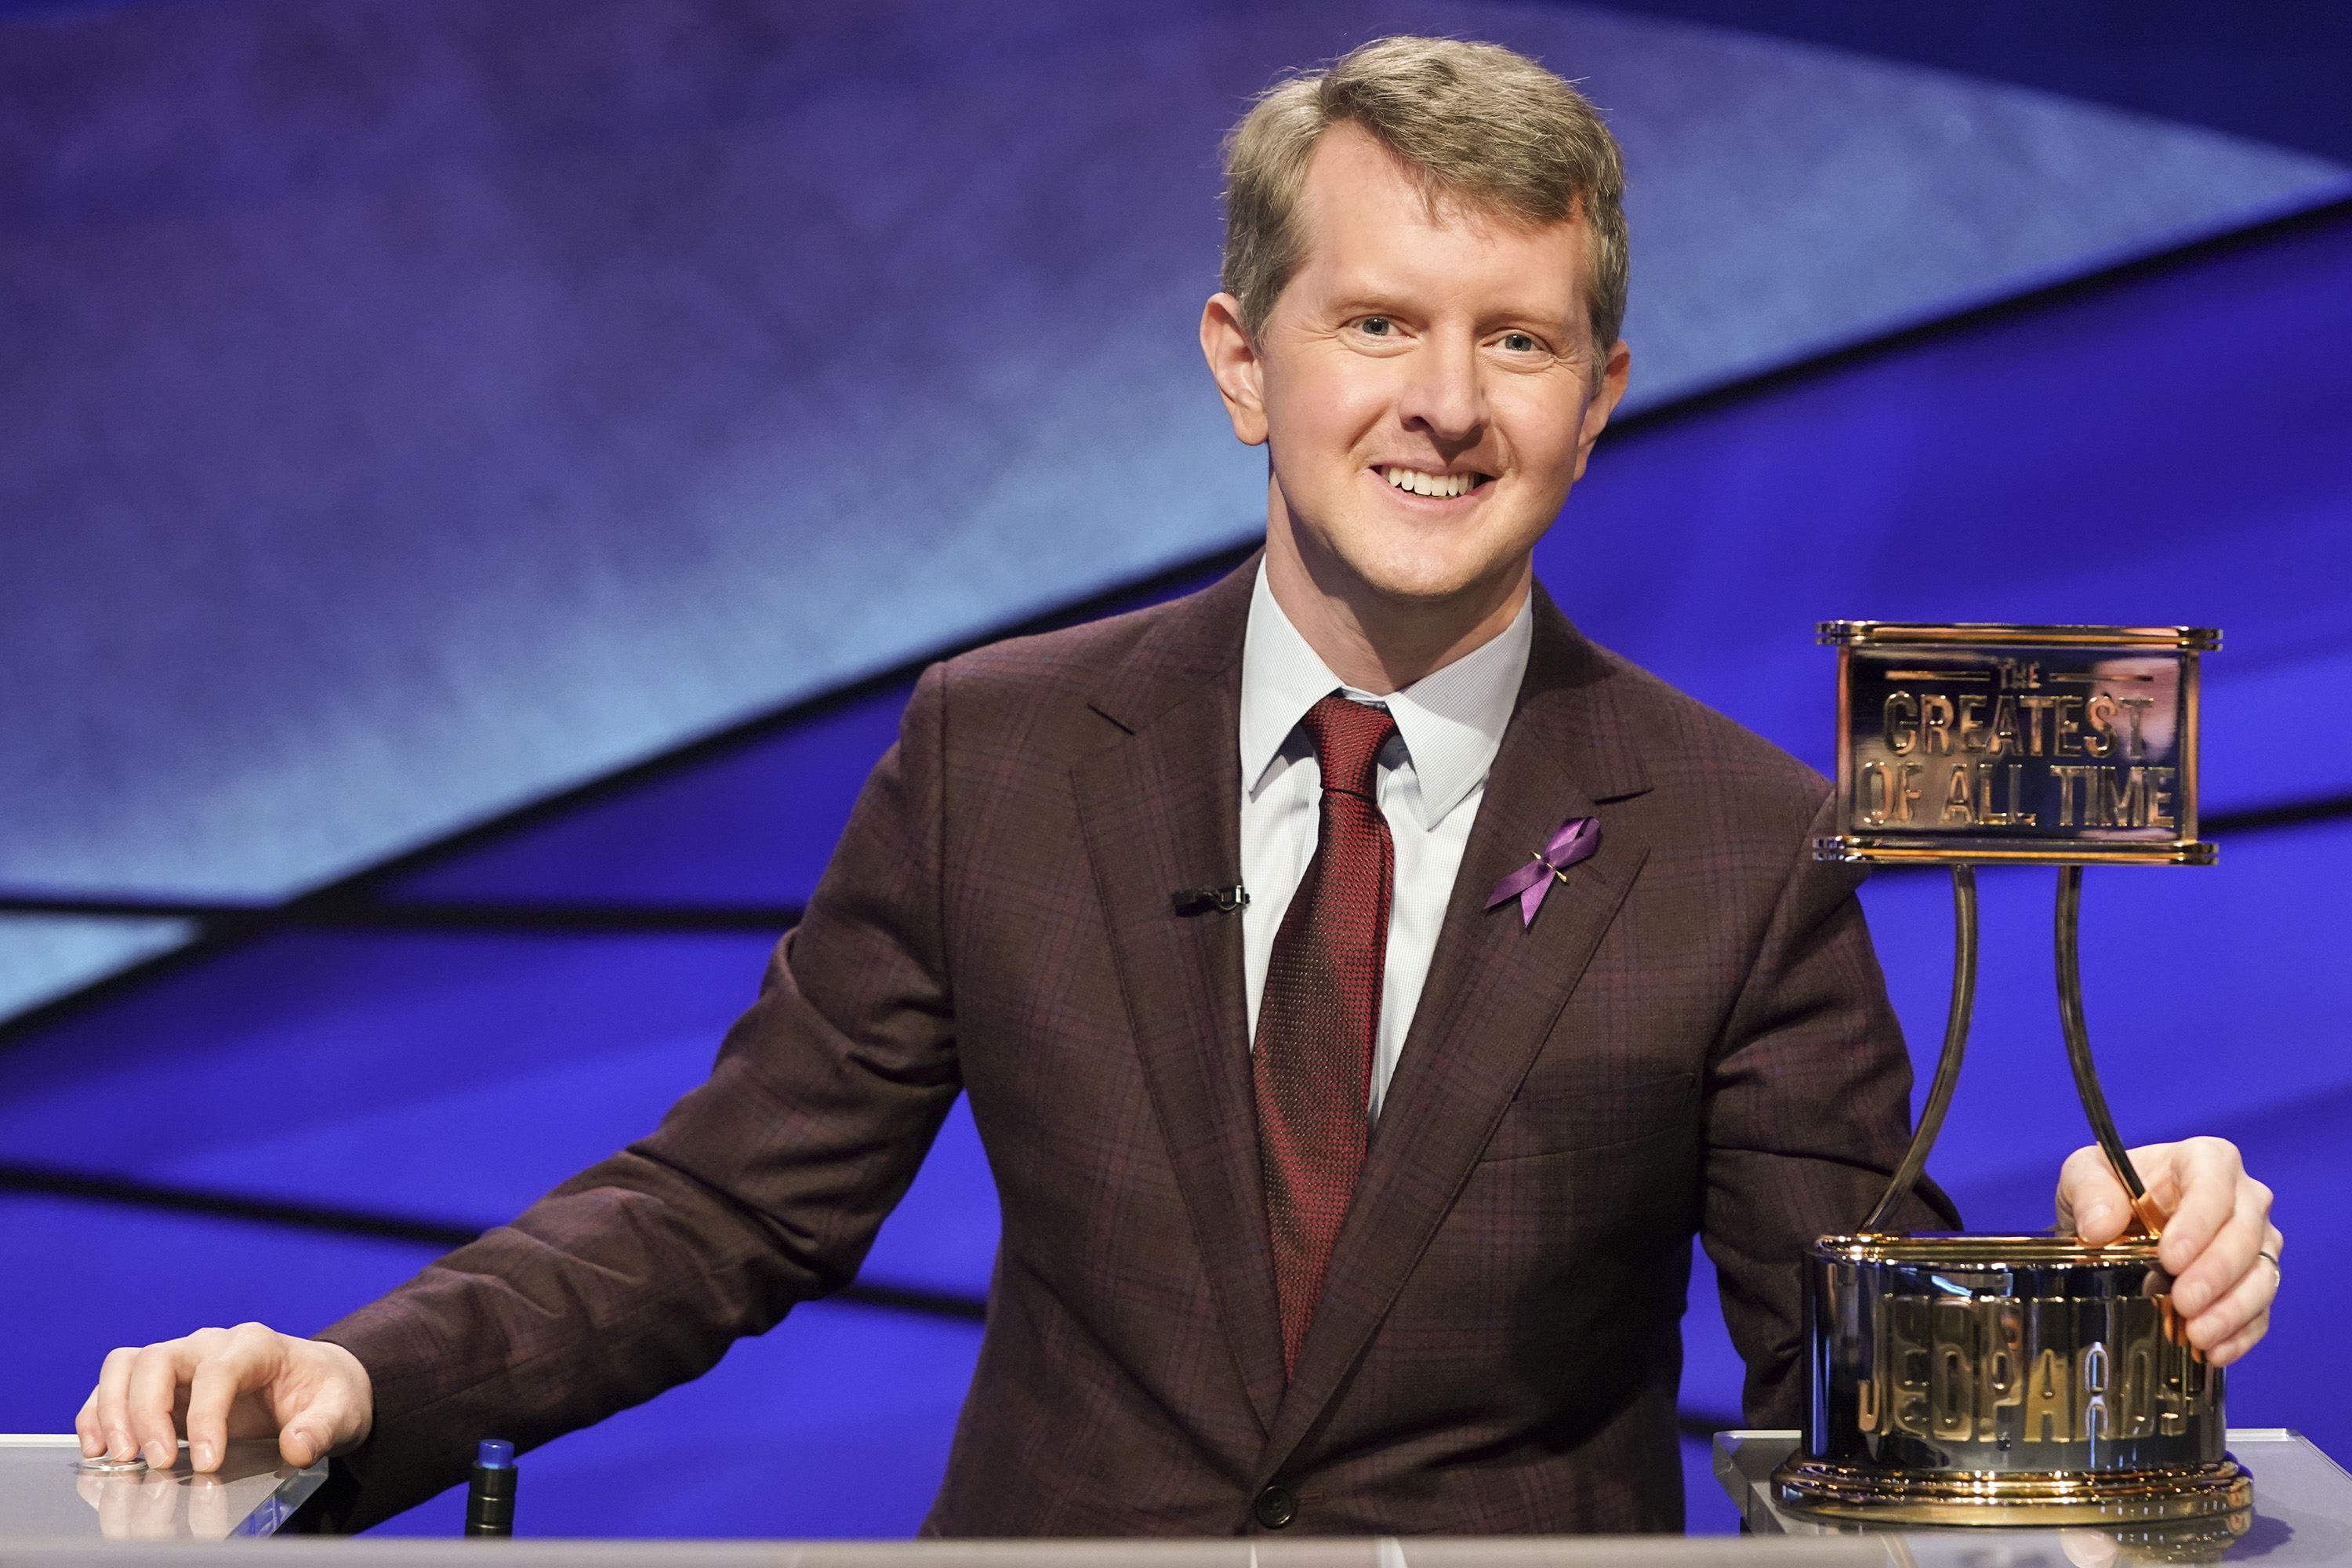 Ken Jennings on the game show "Jeopardy!" in 2019. | Source: Getty Images